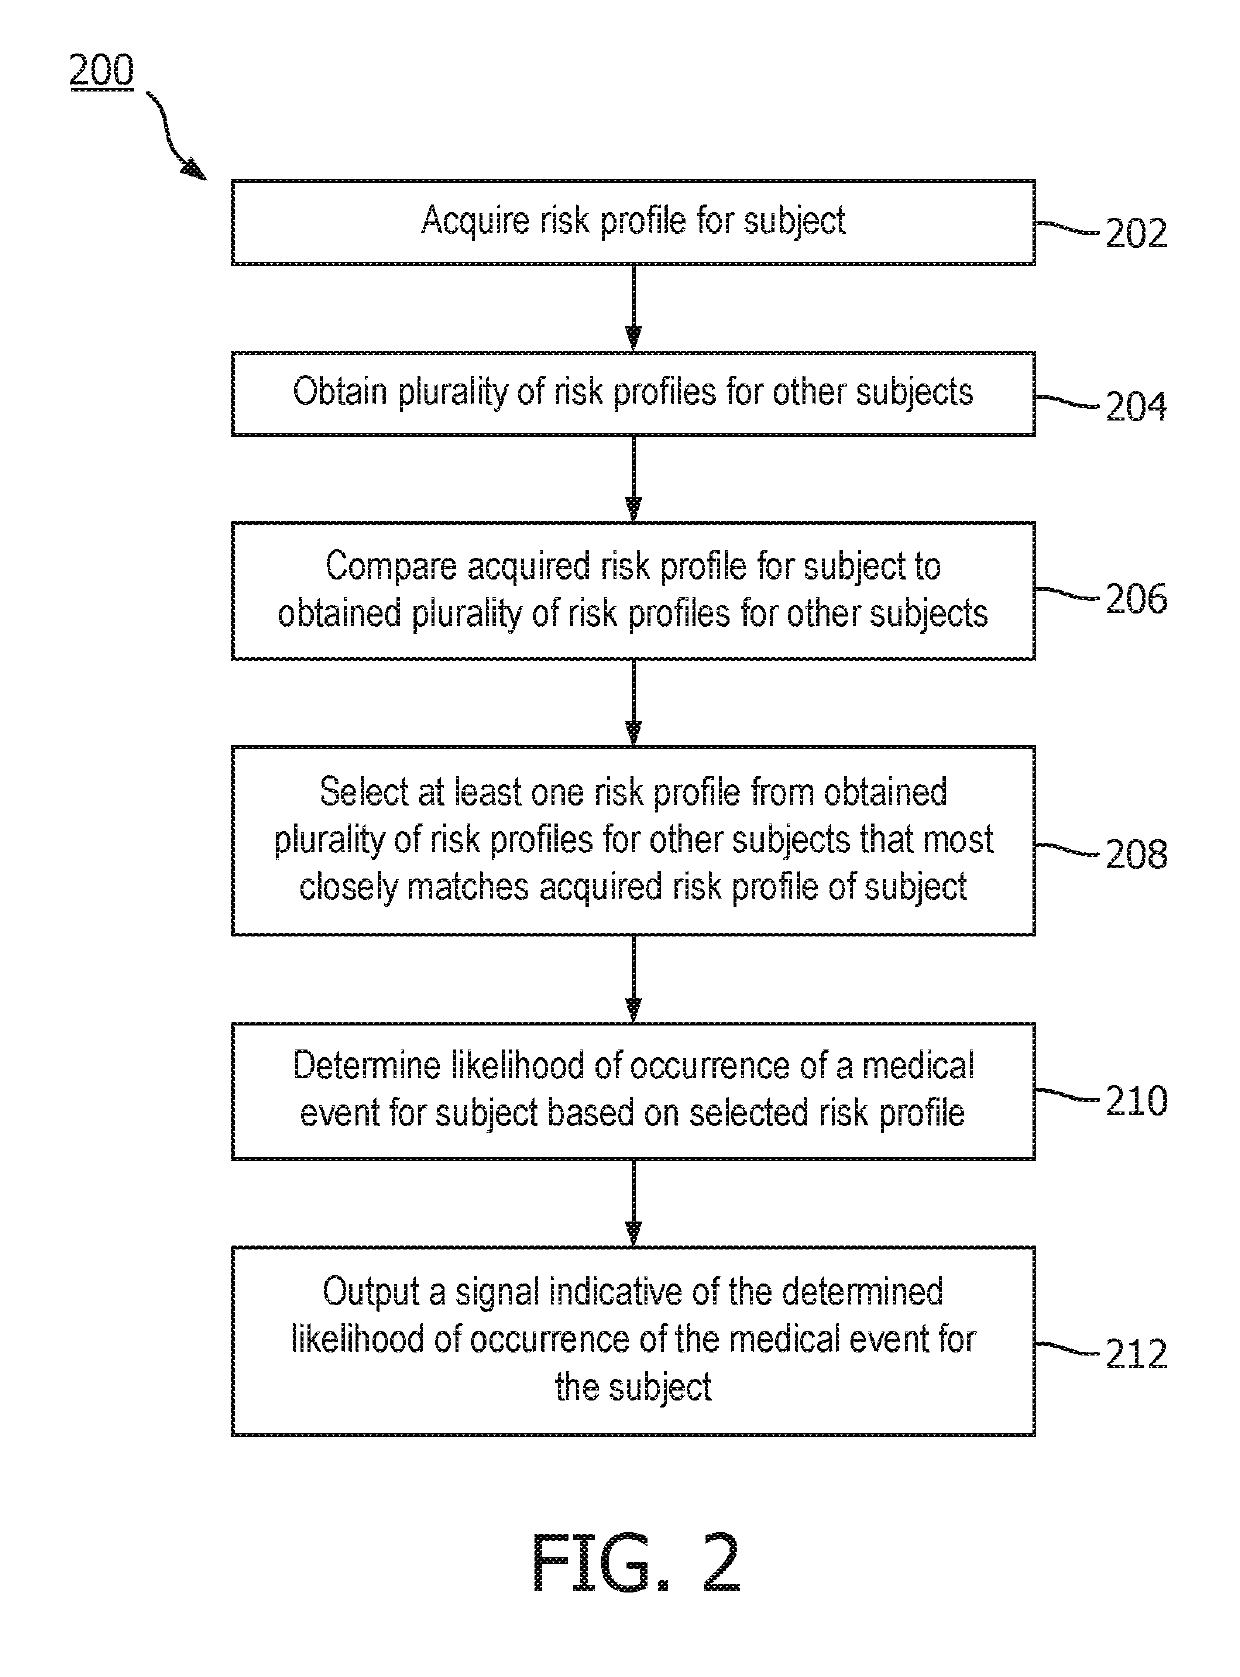 System and method for interpreting patient risk score using the risk scores and medical events from existing and matching patients